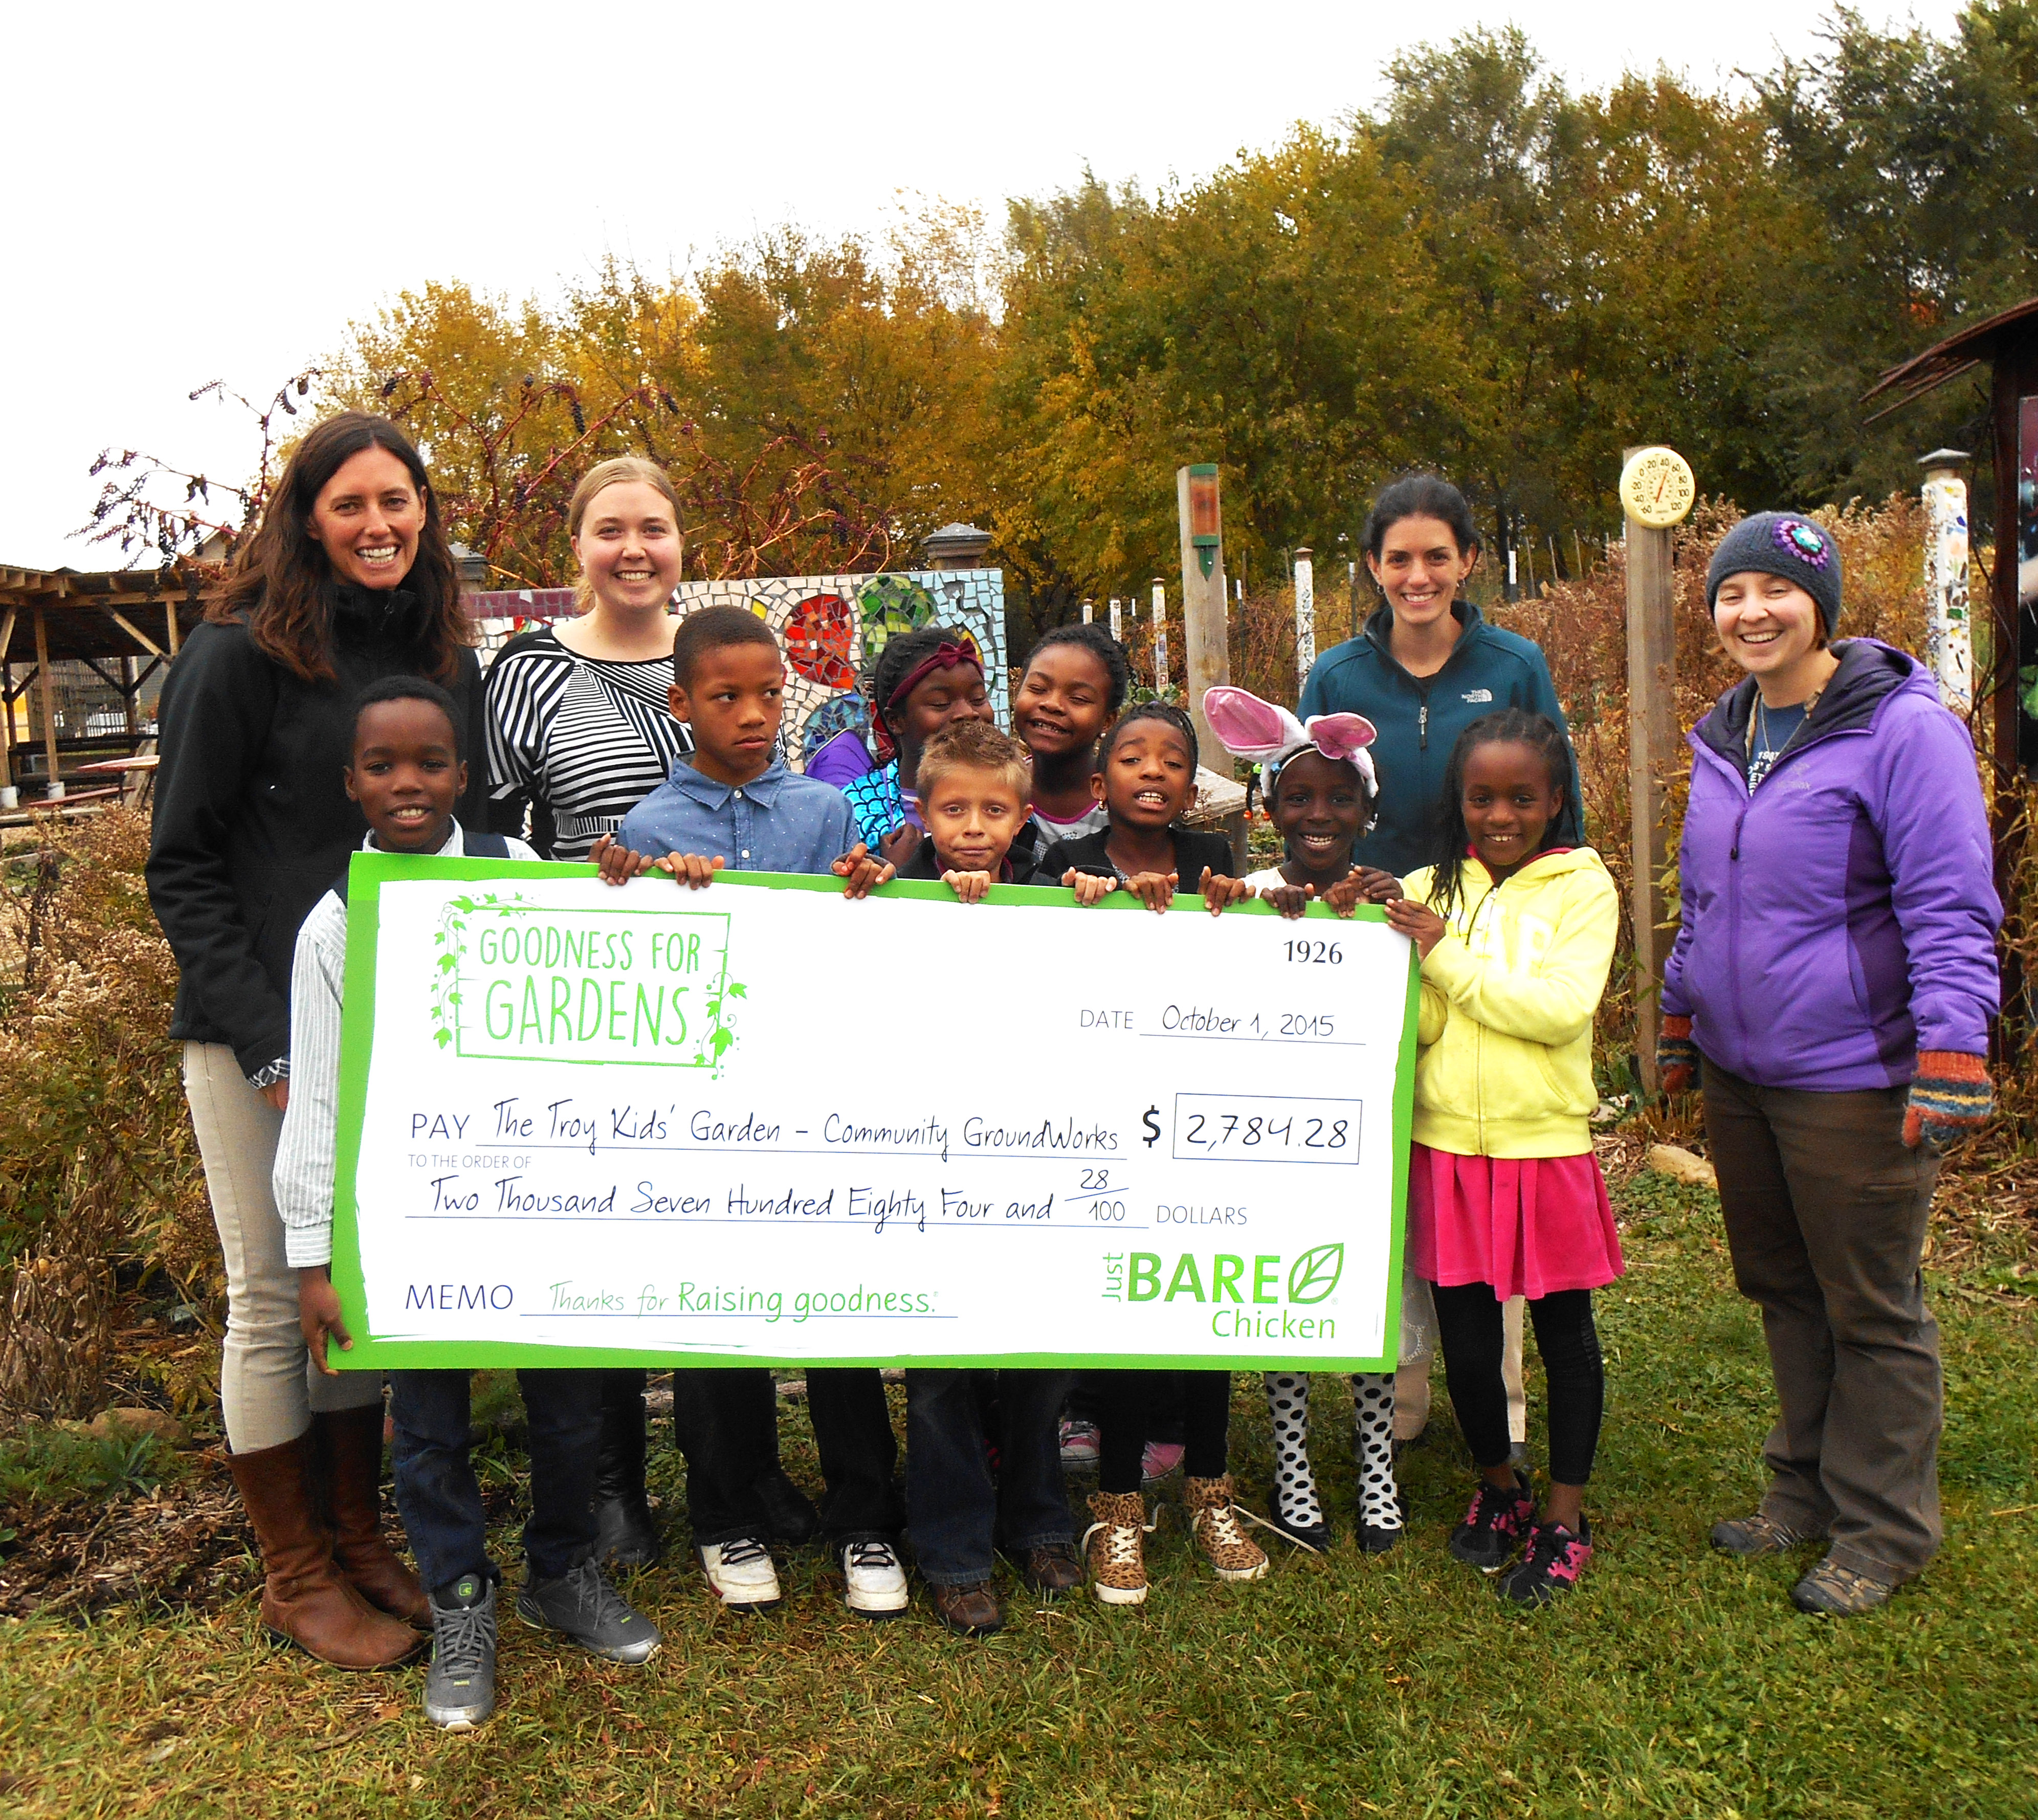 Troy Kids’ Garden – a project of Community GroundWorks in Madison, Wisconsin